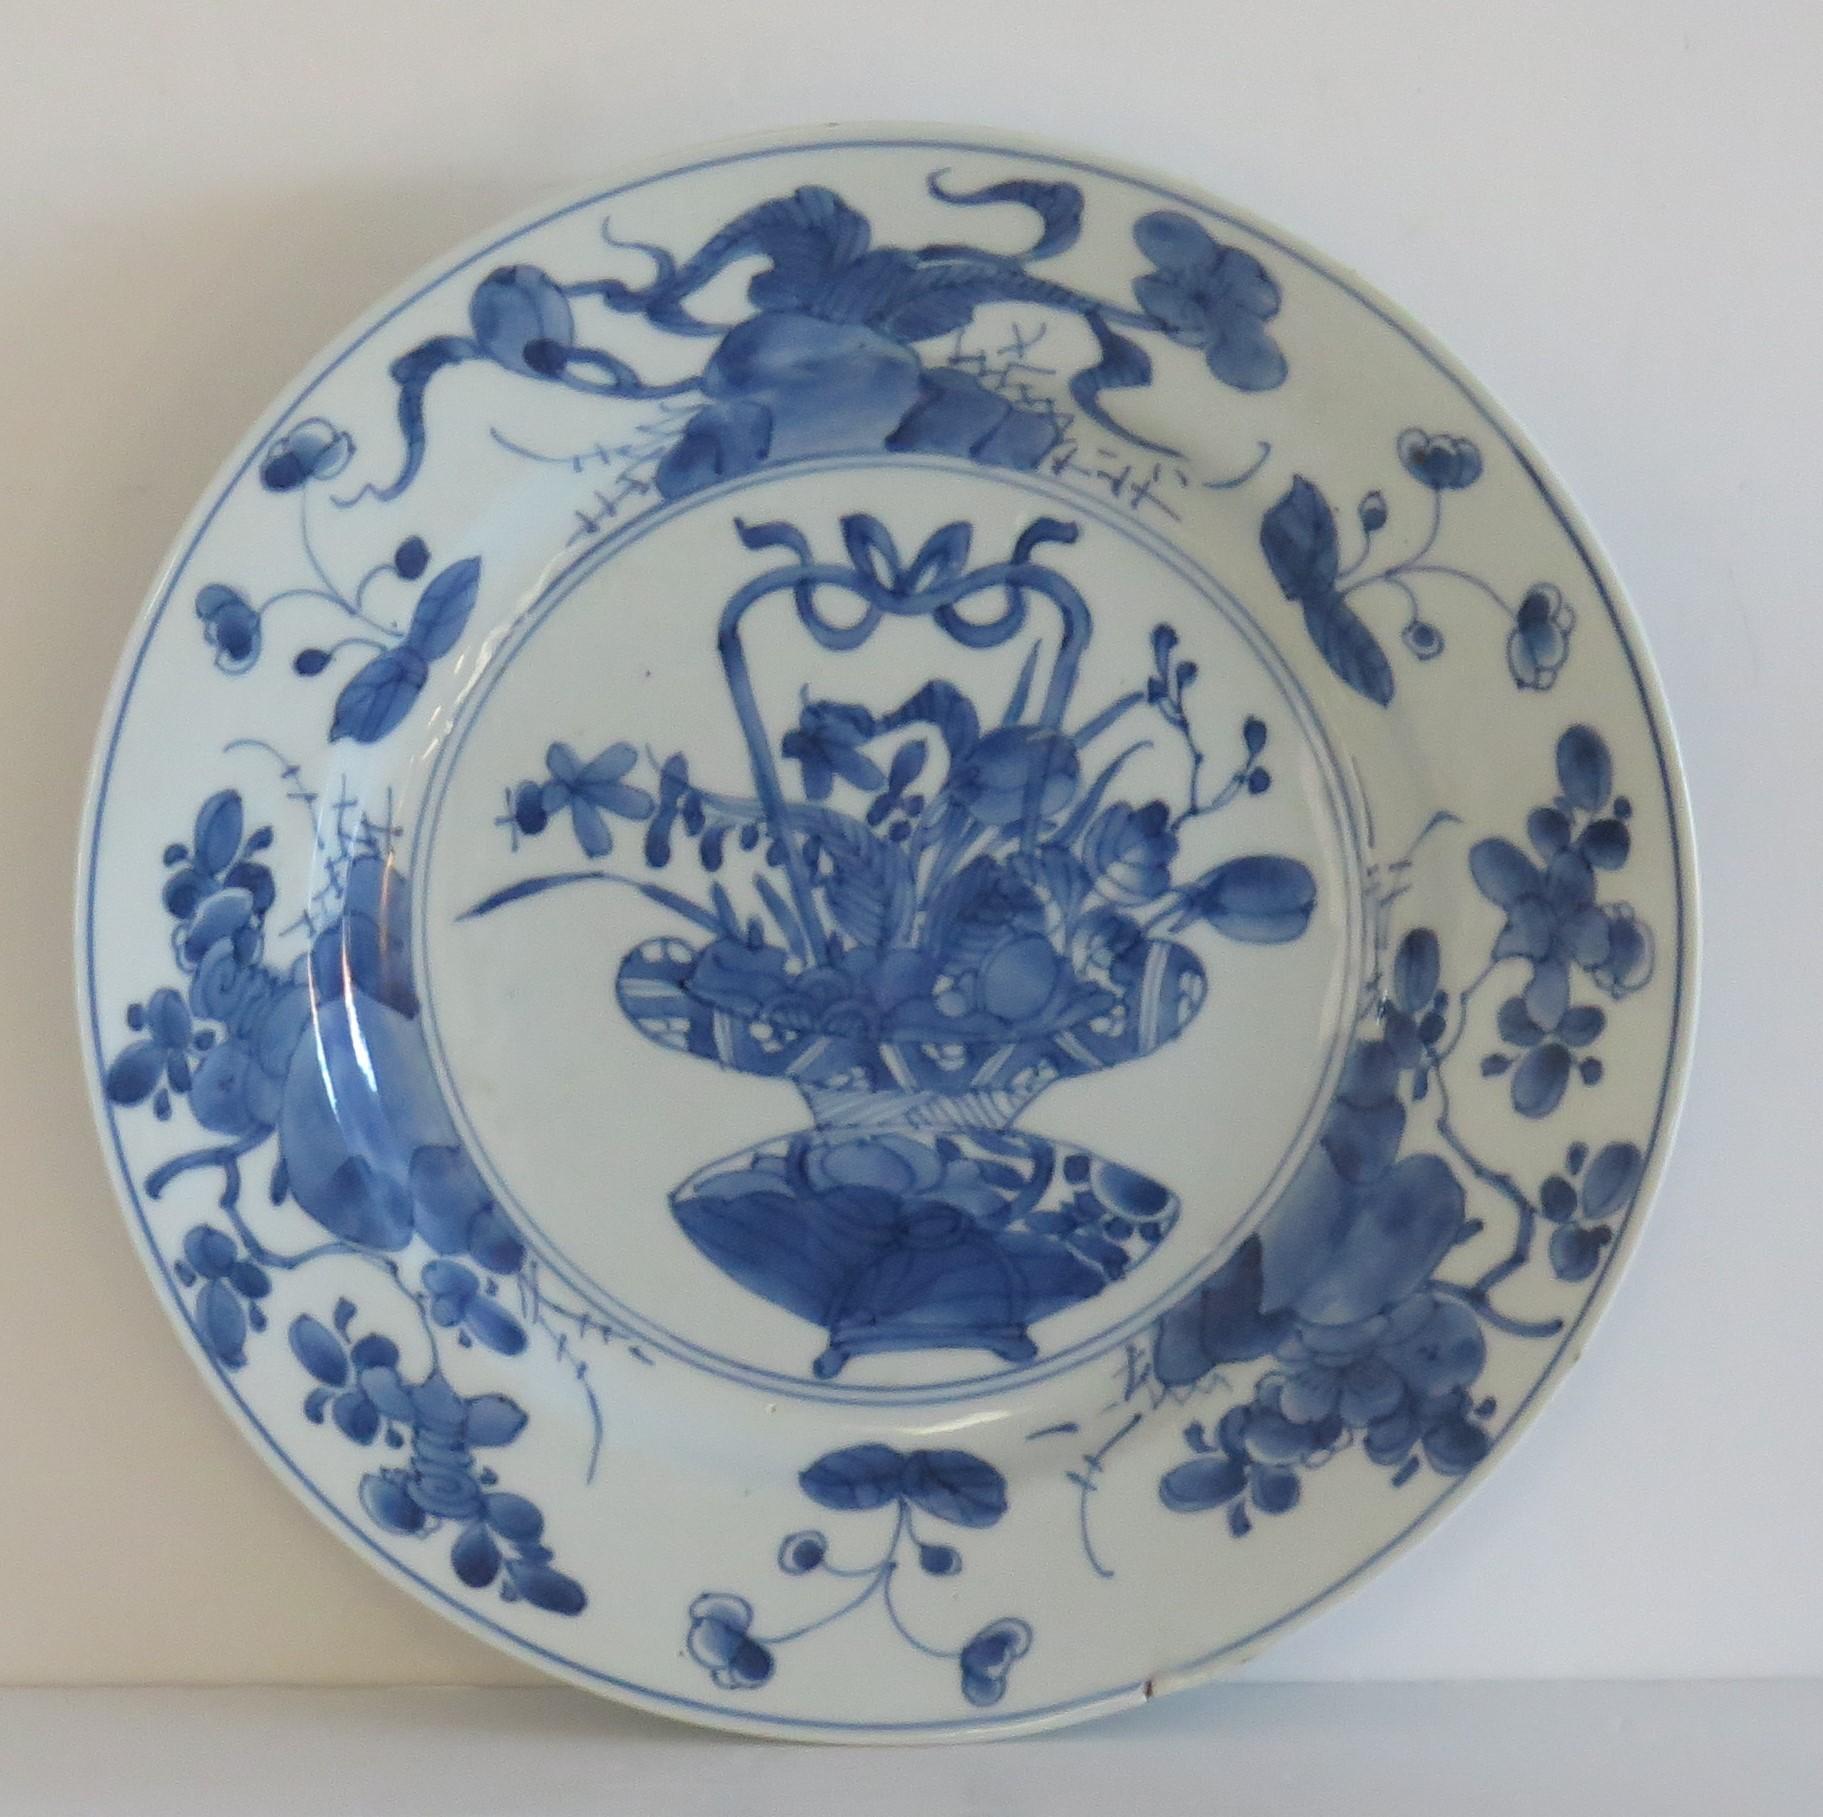 This is a beautifully hand-painted Chinese porcelain blue and white plate from the Qing, Kangxi period, 1662-1722.

The plate is finely potted with a carefully cut base rim and a lovely rich glassy, very light blue glaze.

The plate is